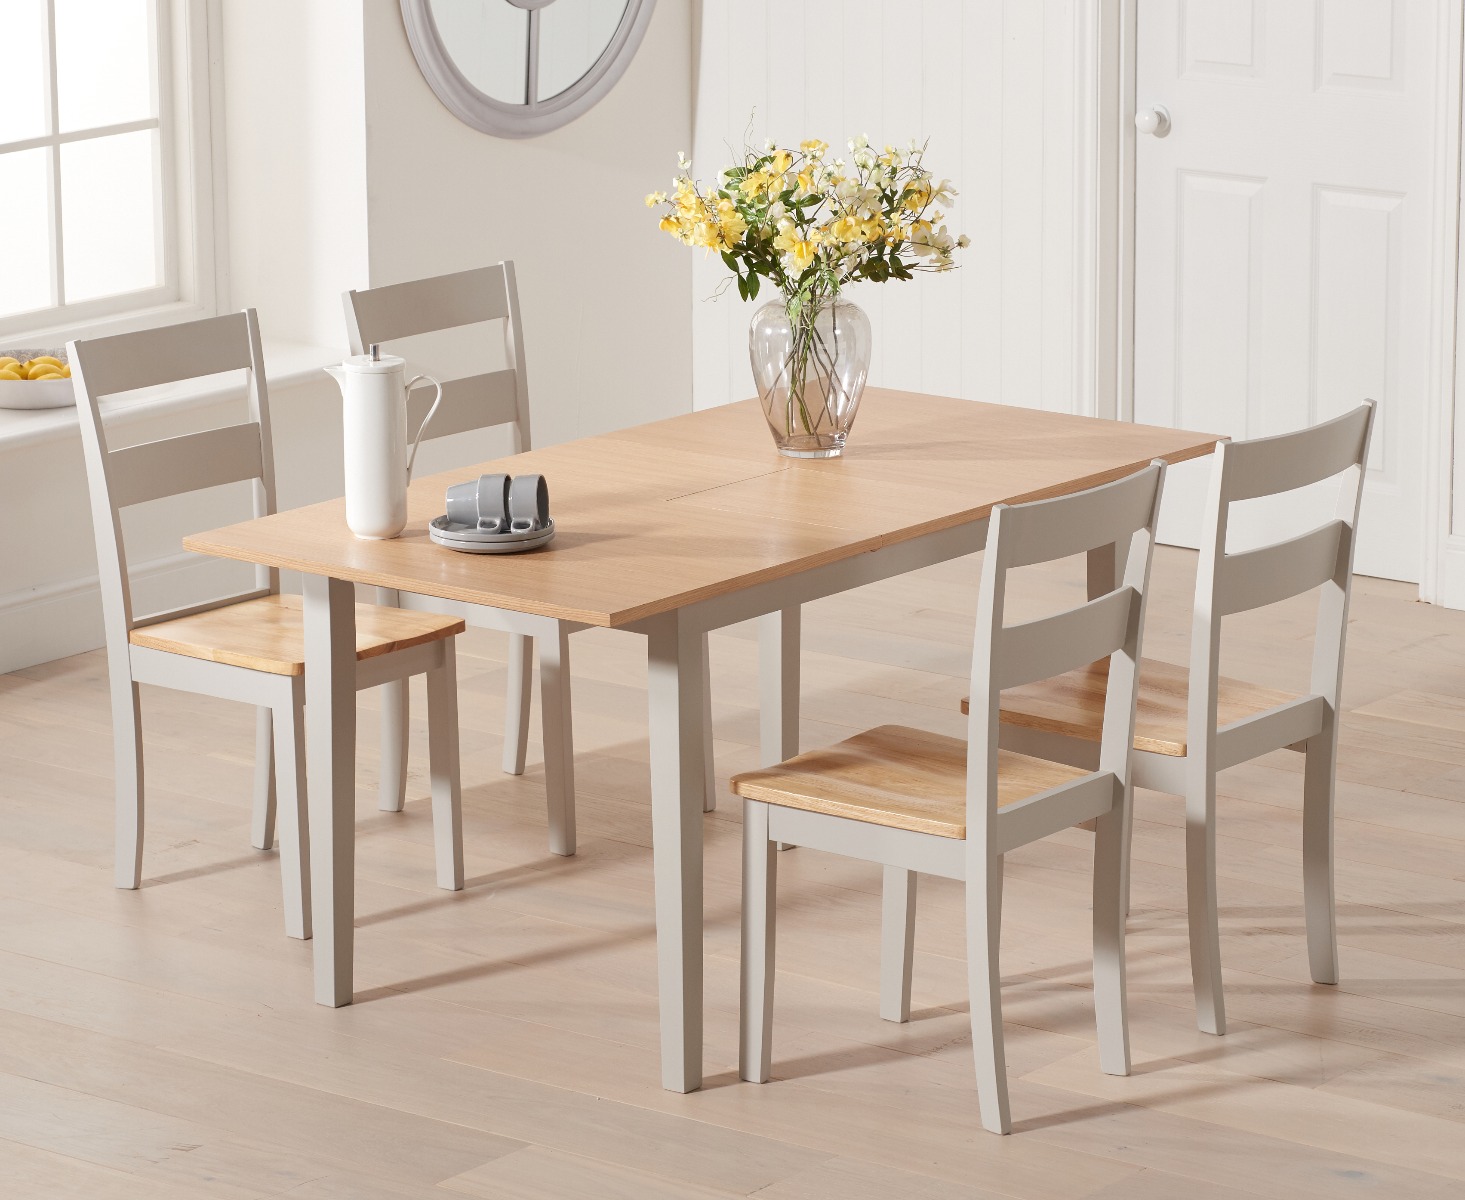 Chiltern 120cm Extending Grey And Oak Painted Table With 6 Oak And Grey Chiltern Chairs